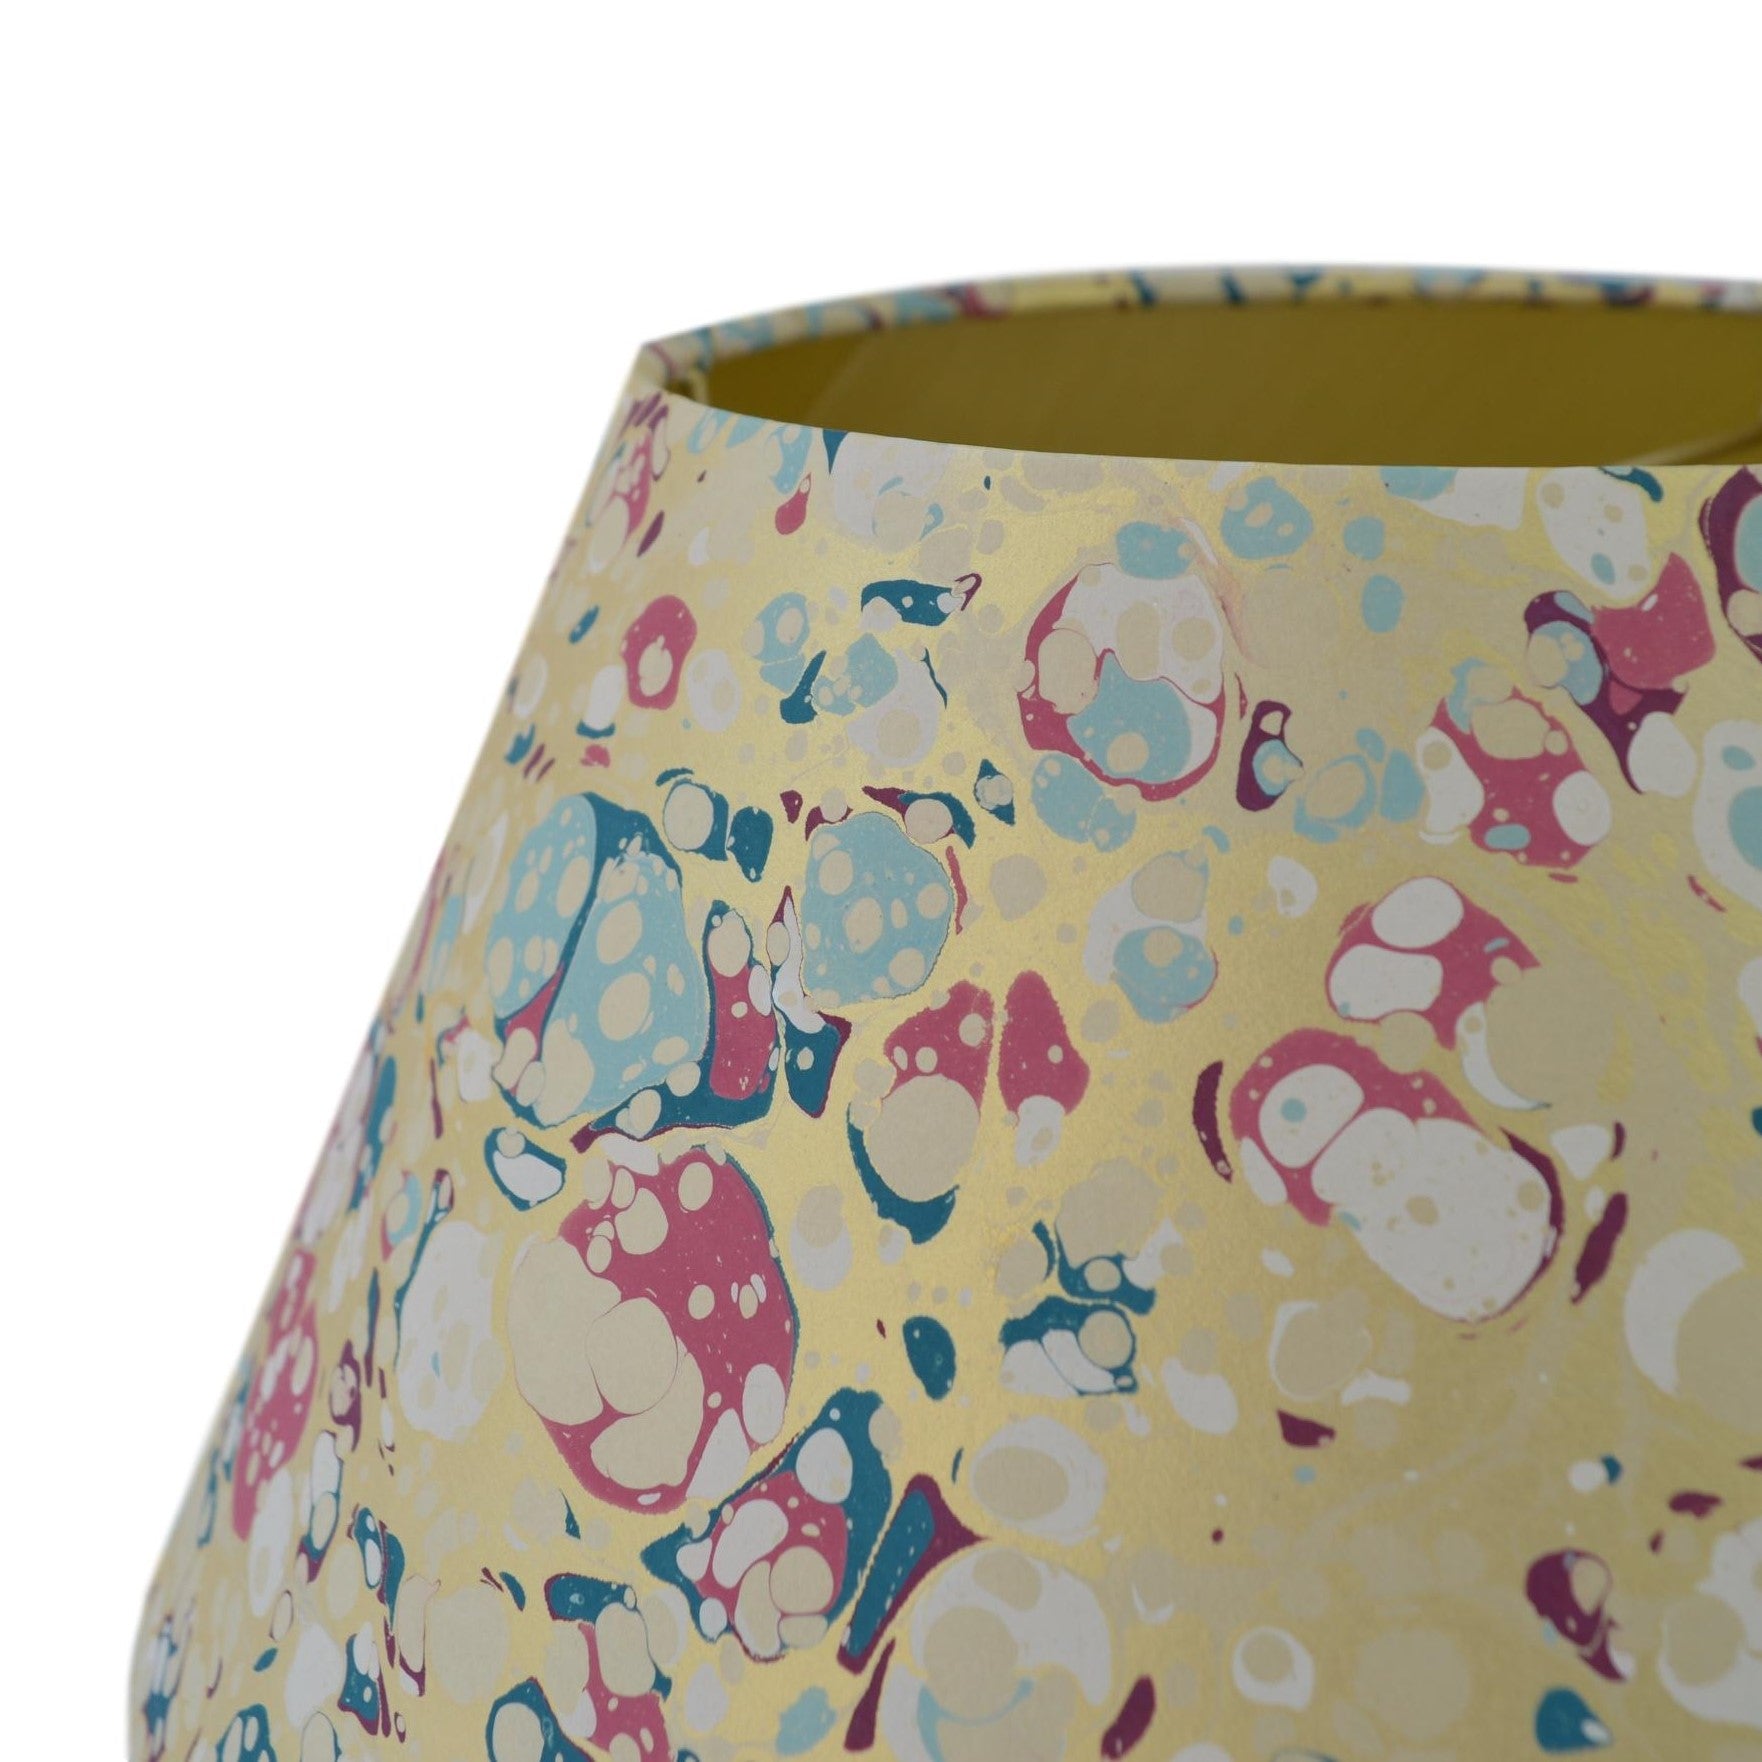 Munro and Kerr blue pink and metallic gold marbled paper for a lampshade